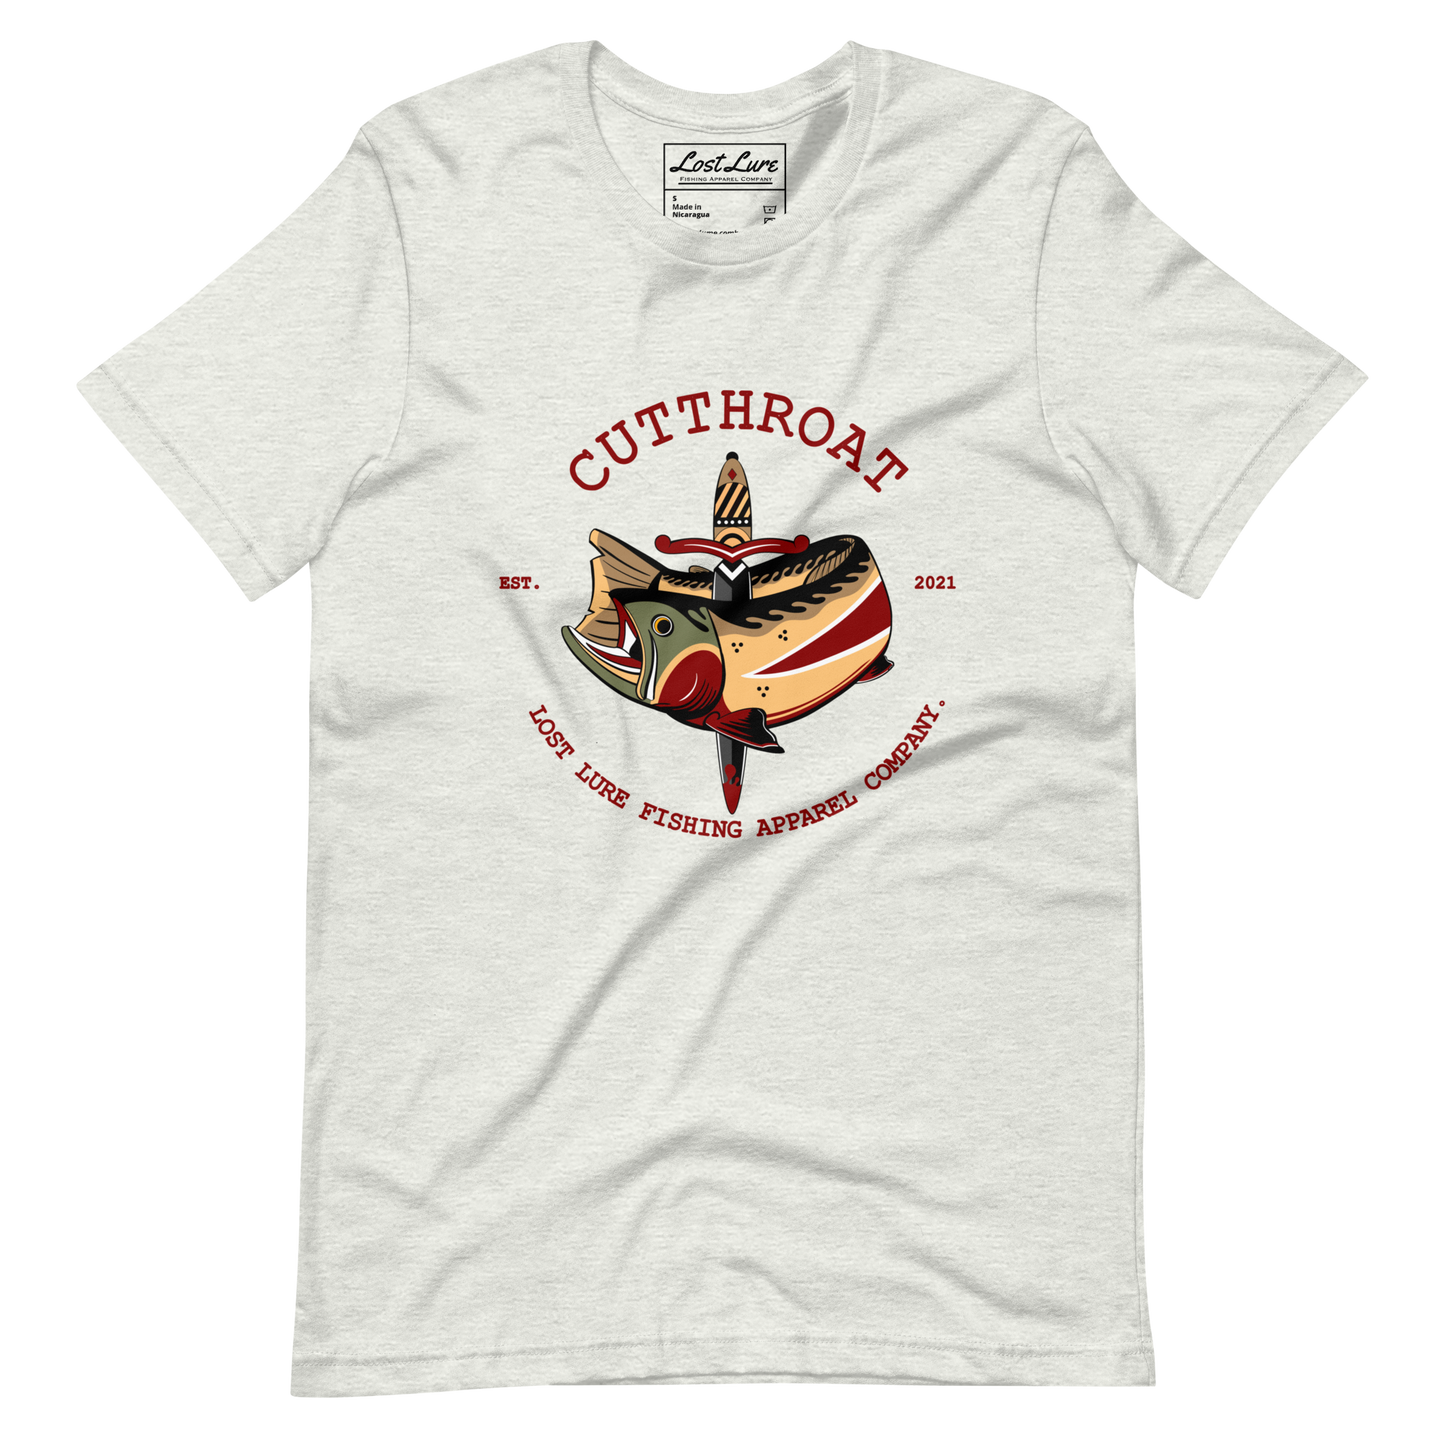 Cutthroat Trout fishing shirt. It’s an American traditional style design with a cutthroat trout and a dagger. The shirt reads Cutthroat trout, est. 2021, lost lure fishing apparel company. The fishing design is on the front of the shirt, crème color 